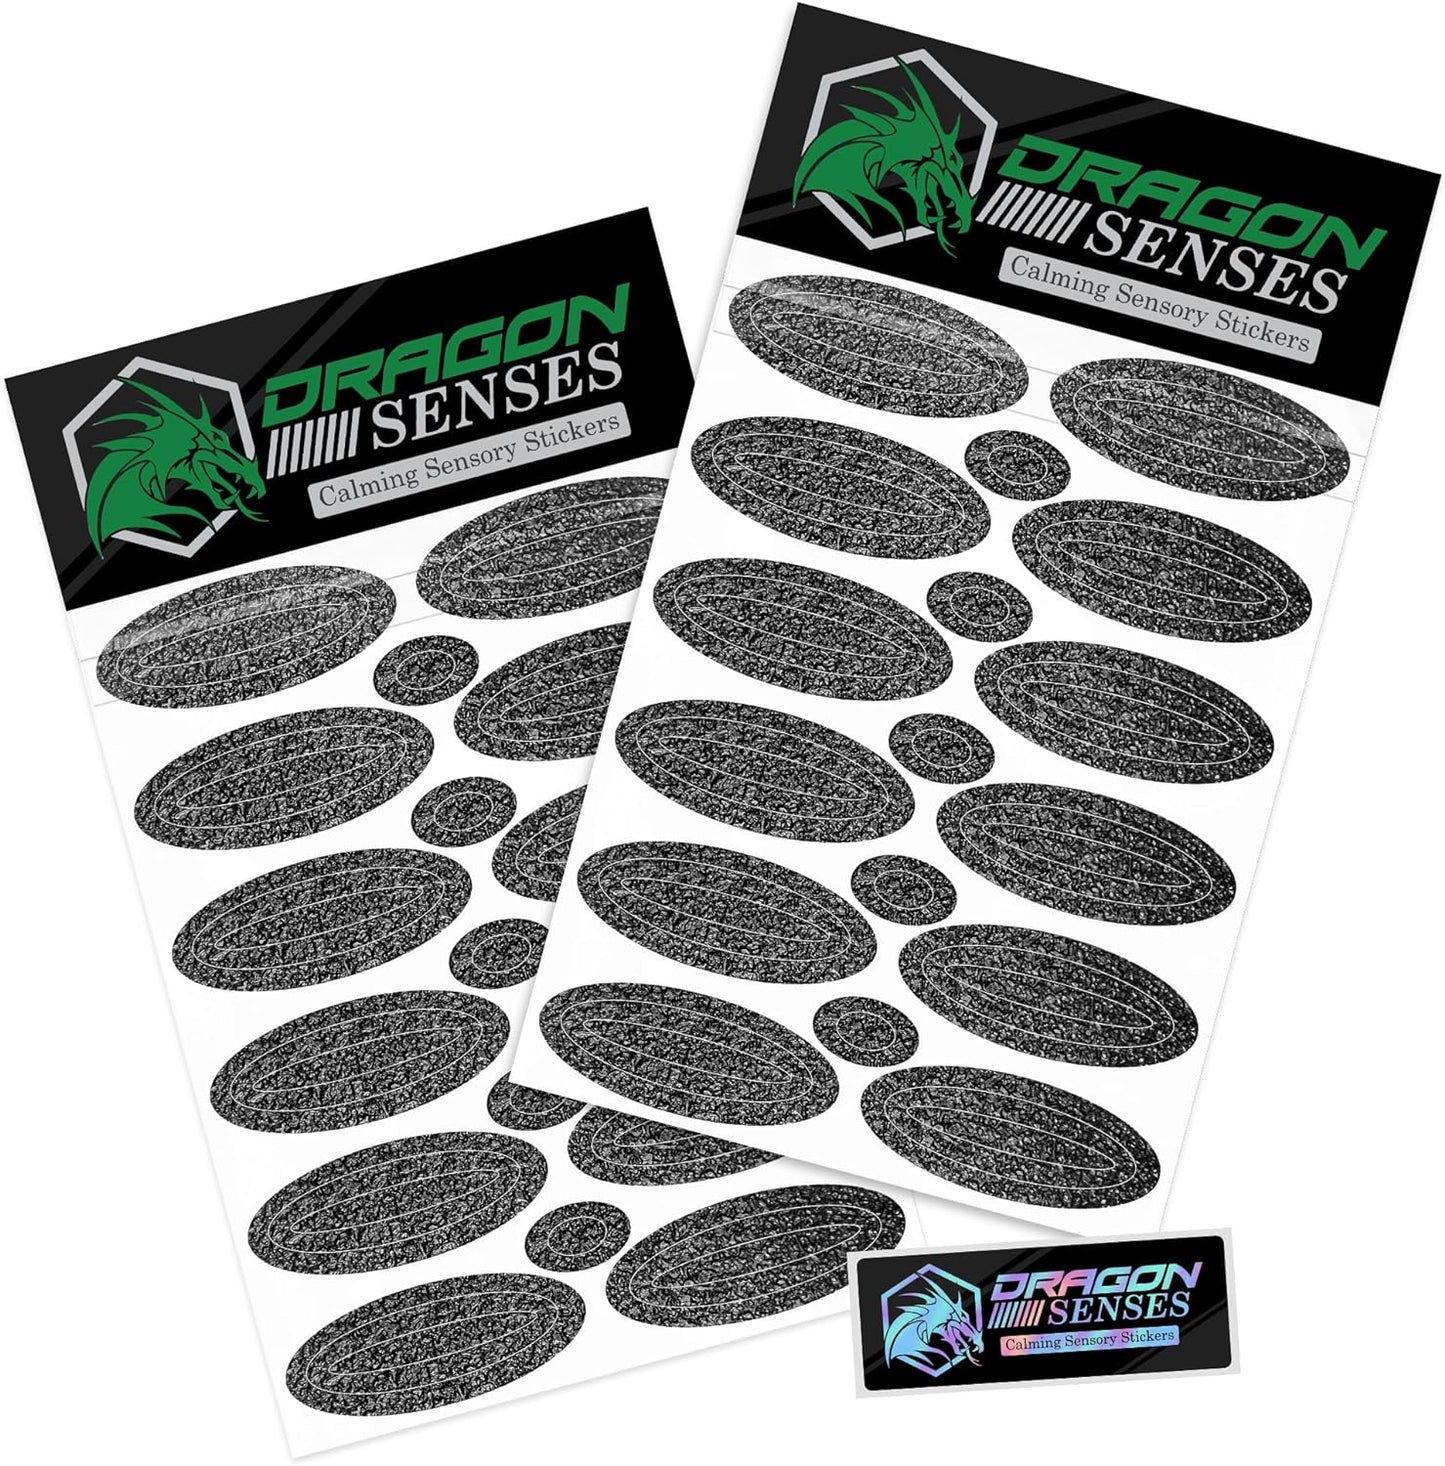 Dragon Senses Calm Strips for Anxiety Sensory Stickers, Textured Stickers with Enhance Sensory Soothing & Calming Effect for Special Needs